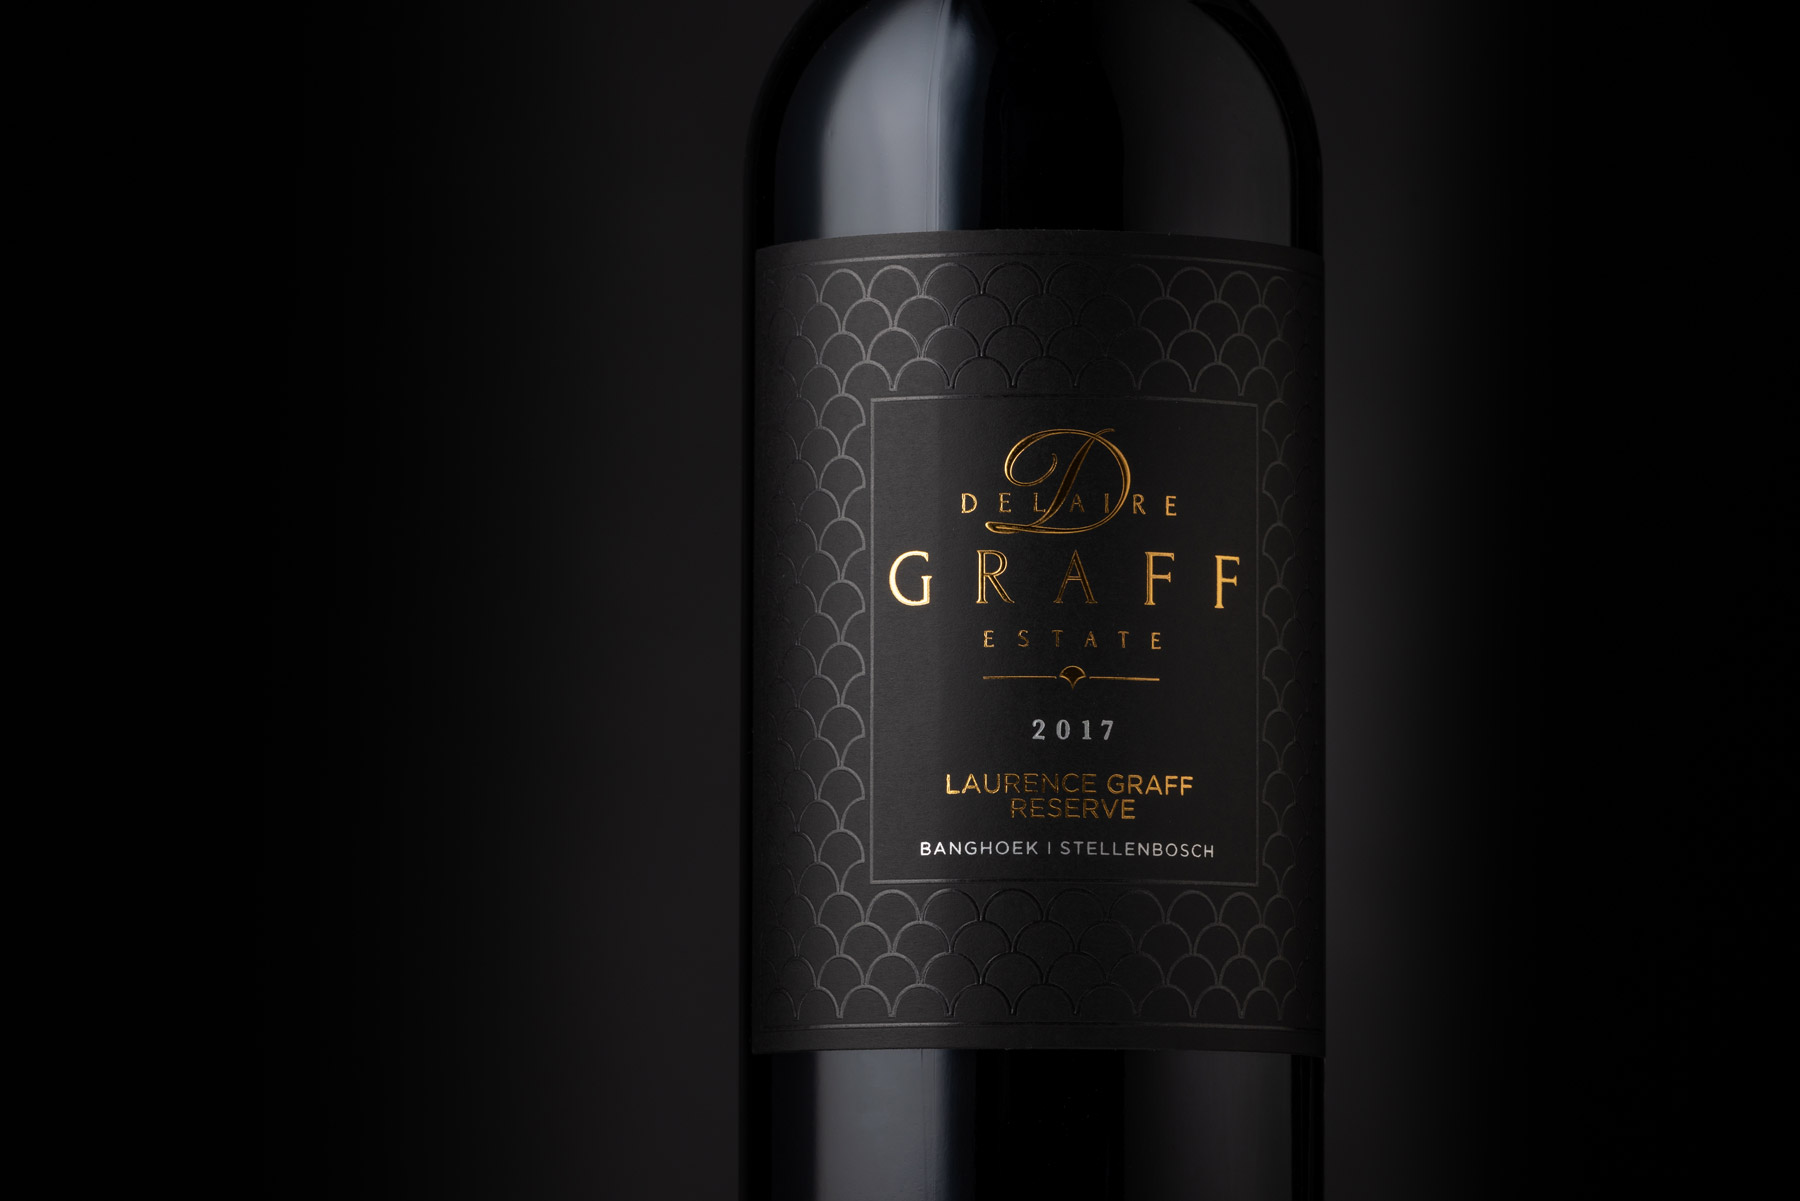 Bottle of Laurence Graff Reserve red wine from Delaire Graff Estate